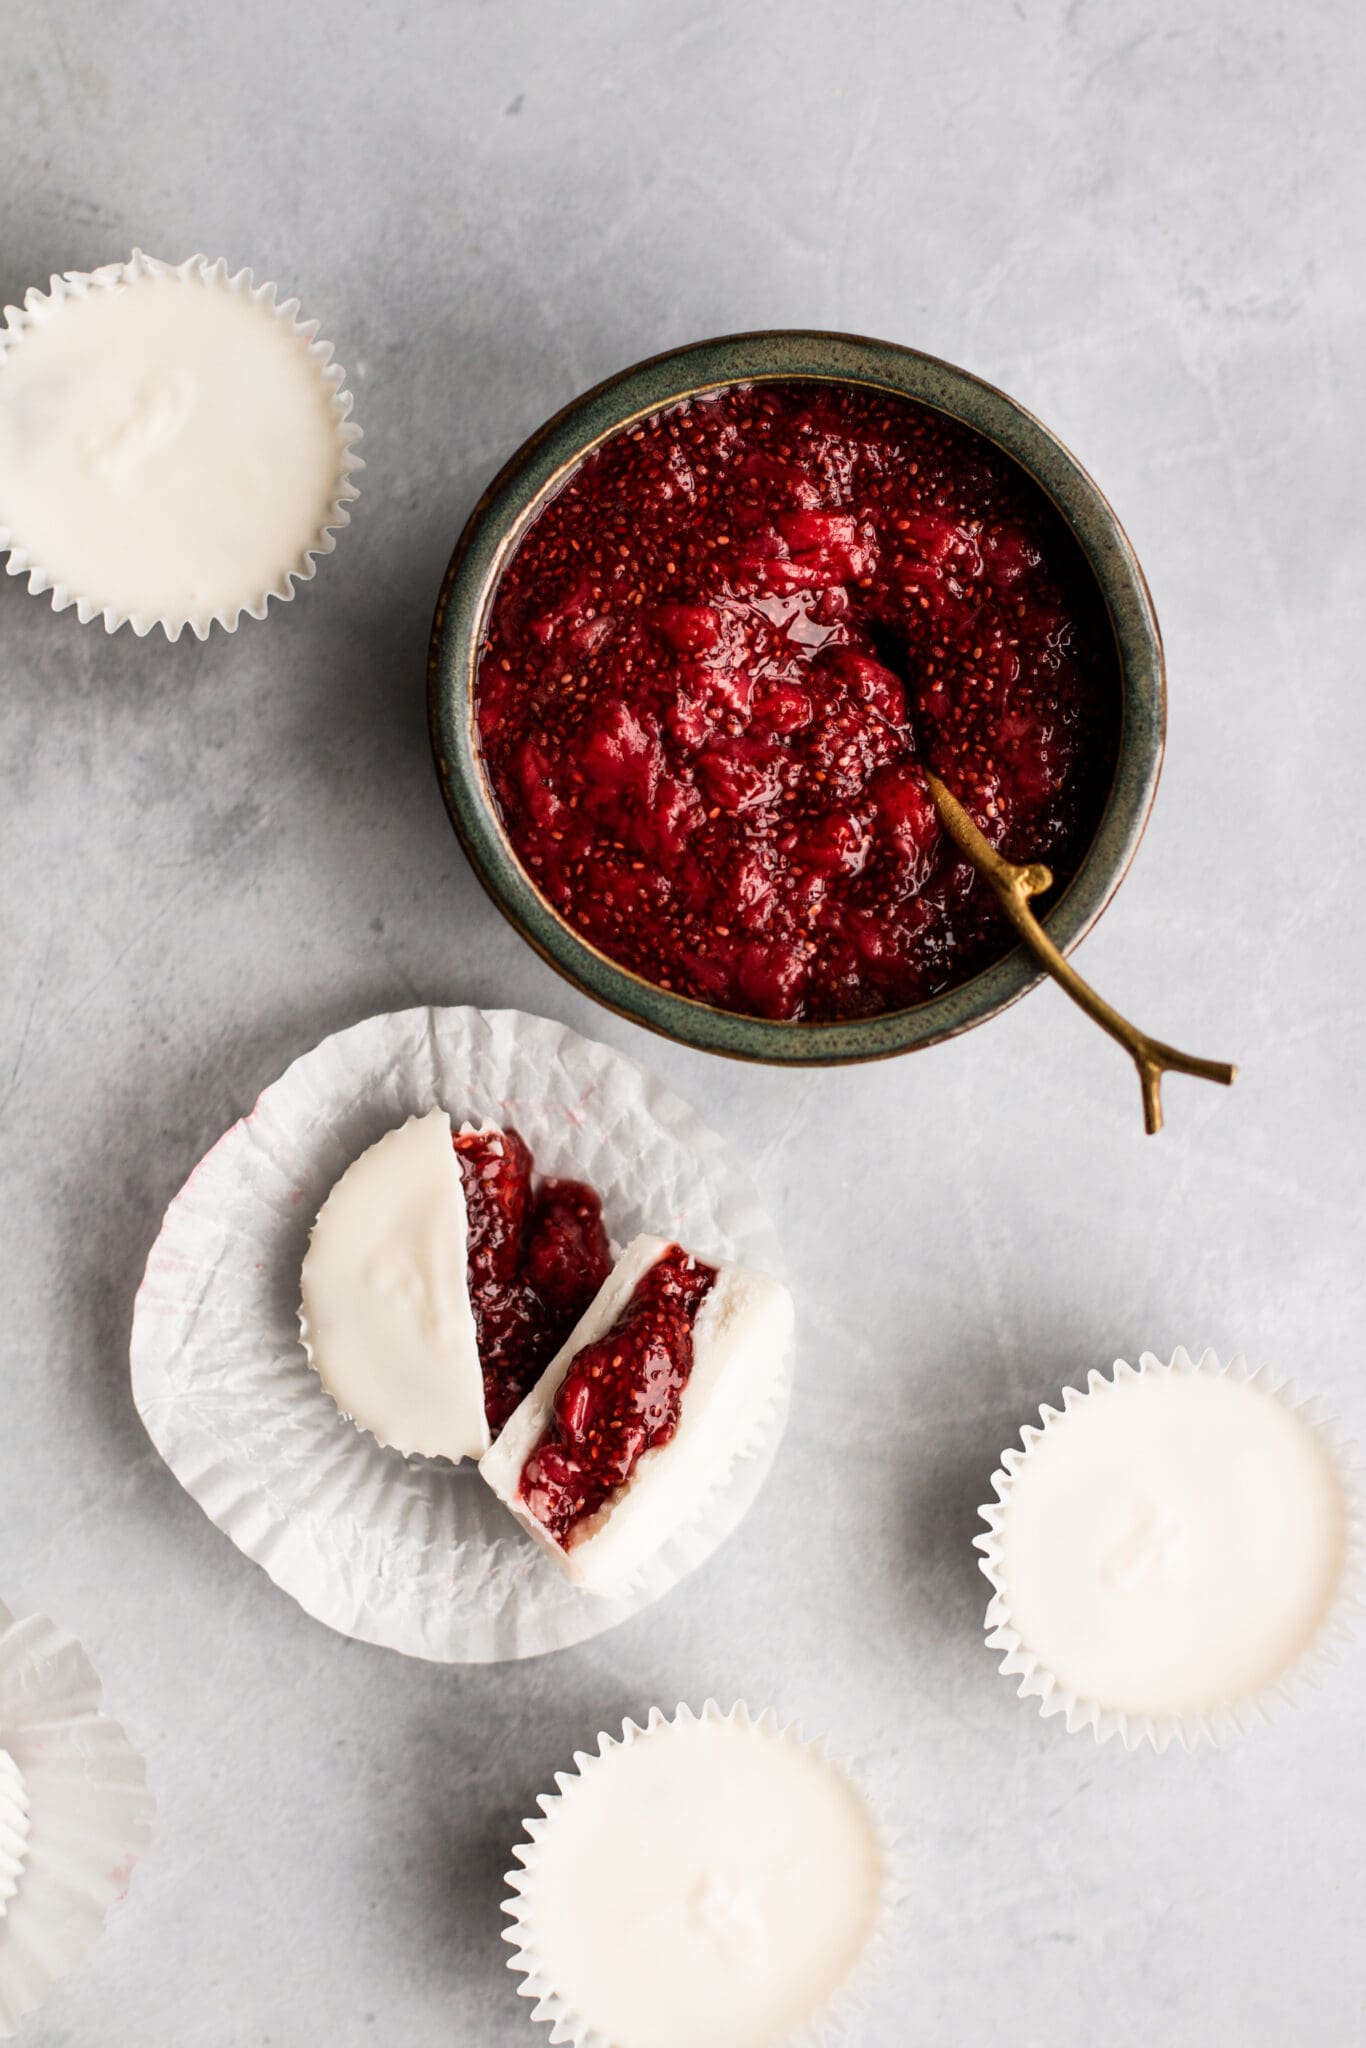 Strawberry chia jam in a bowl with white chocolate cups on the side